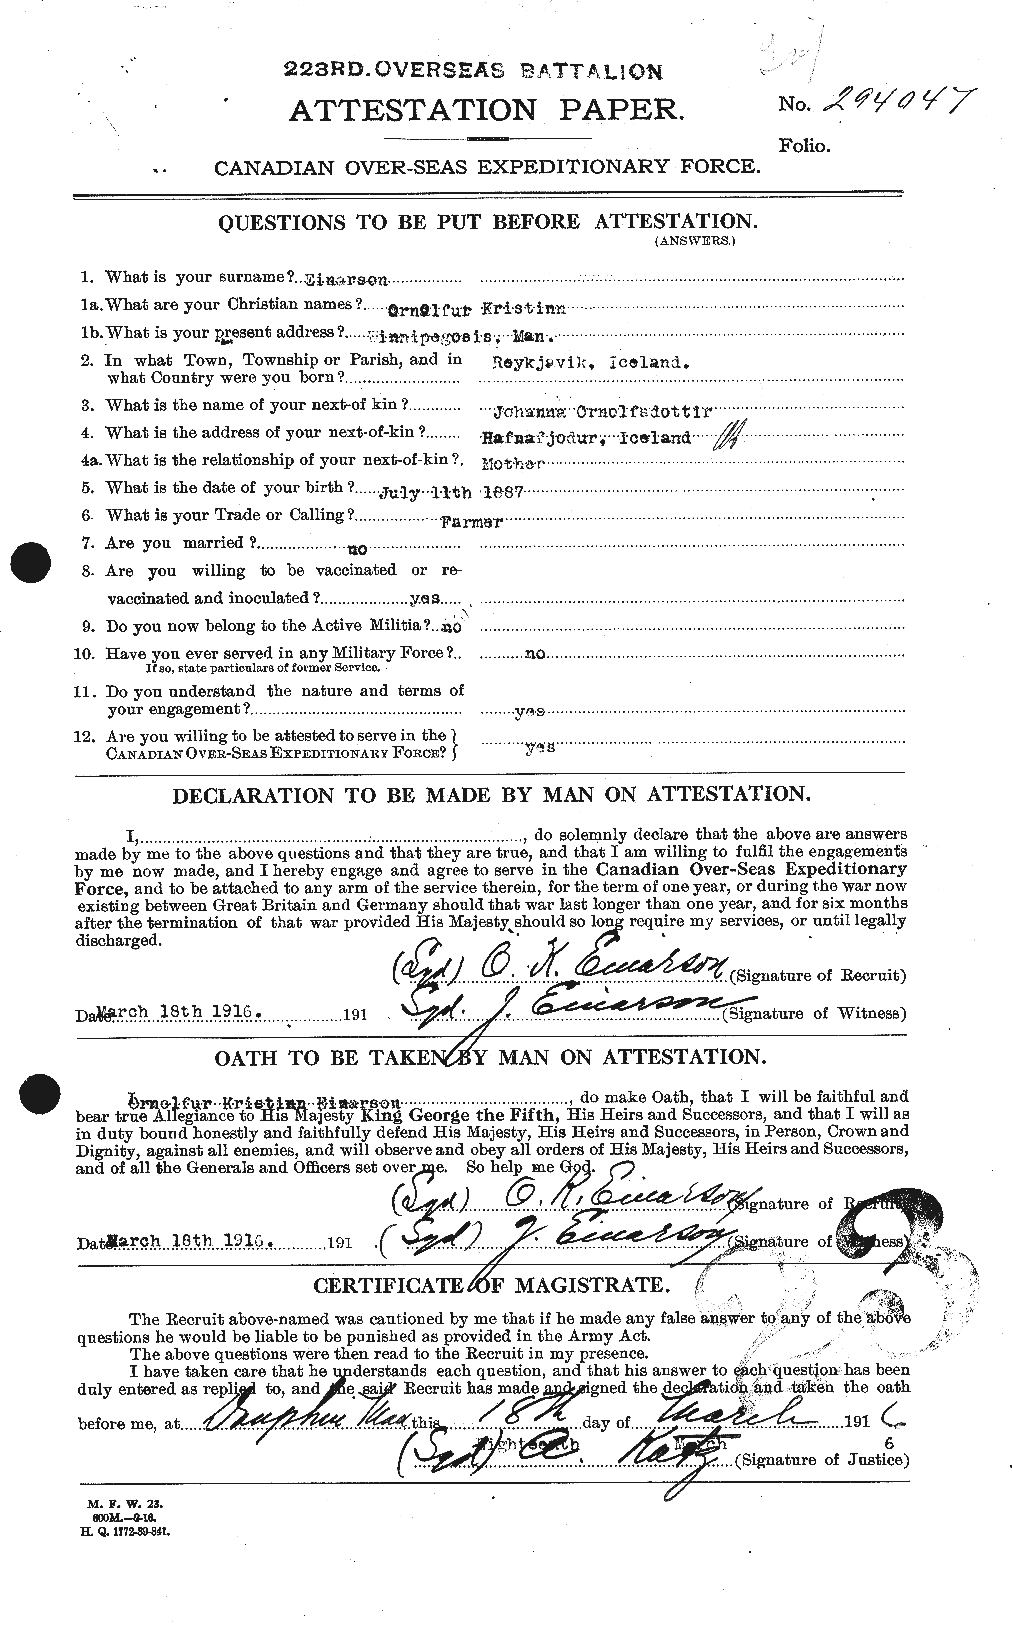 Personnel Records of the First World War - CEF 310065a